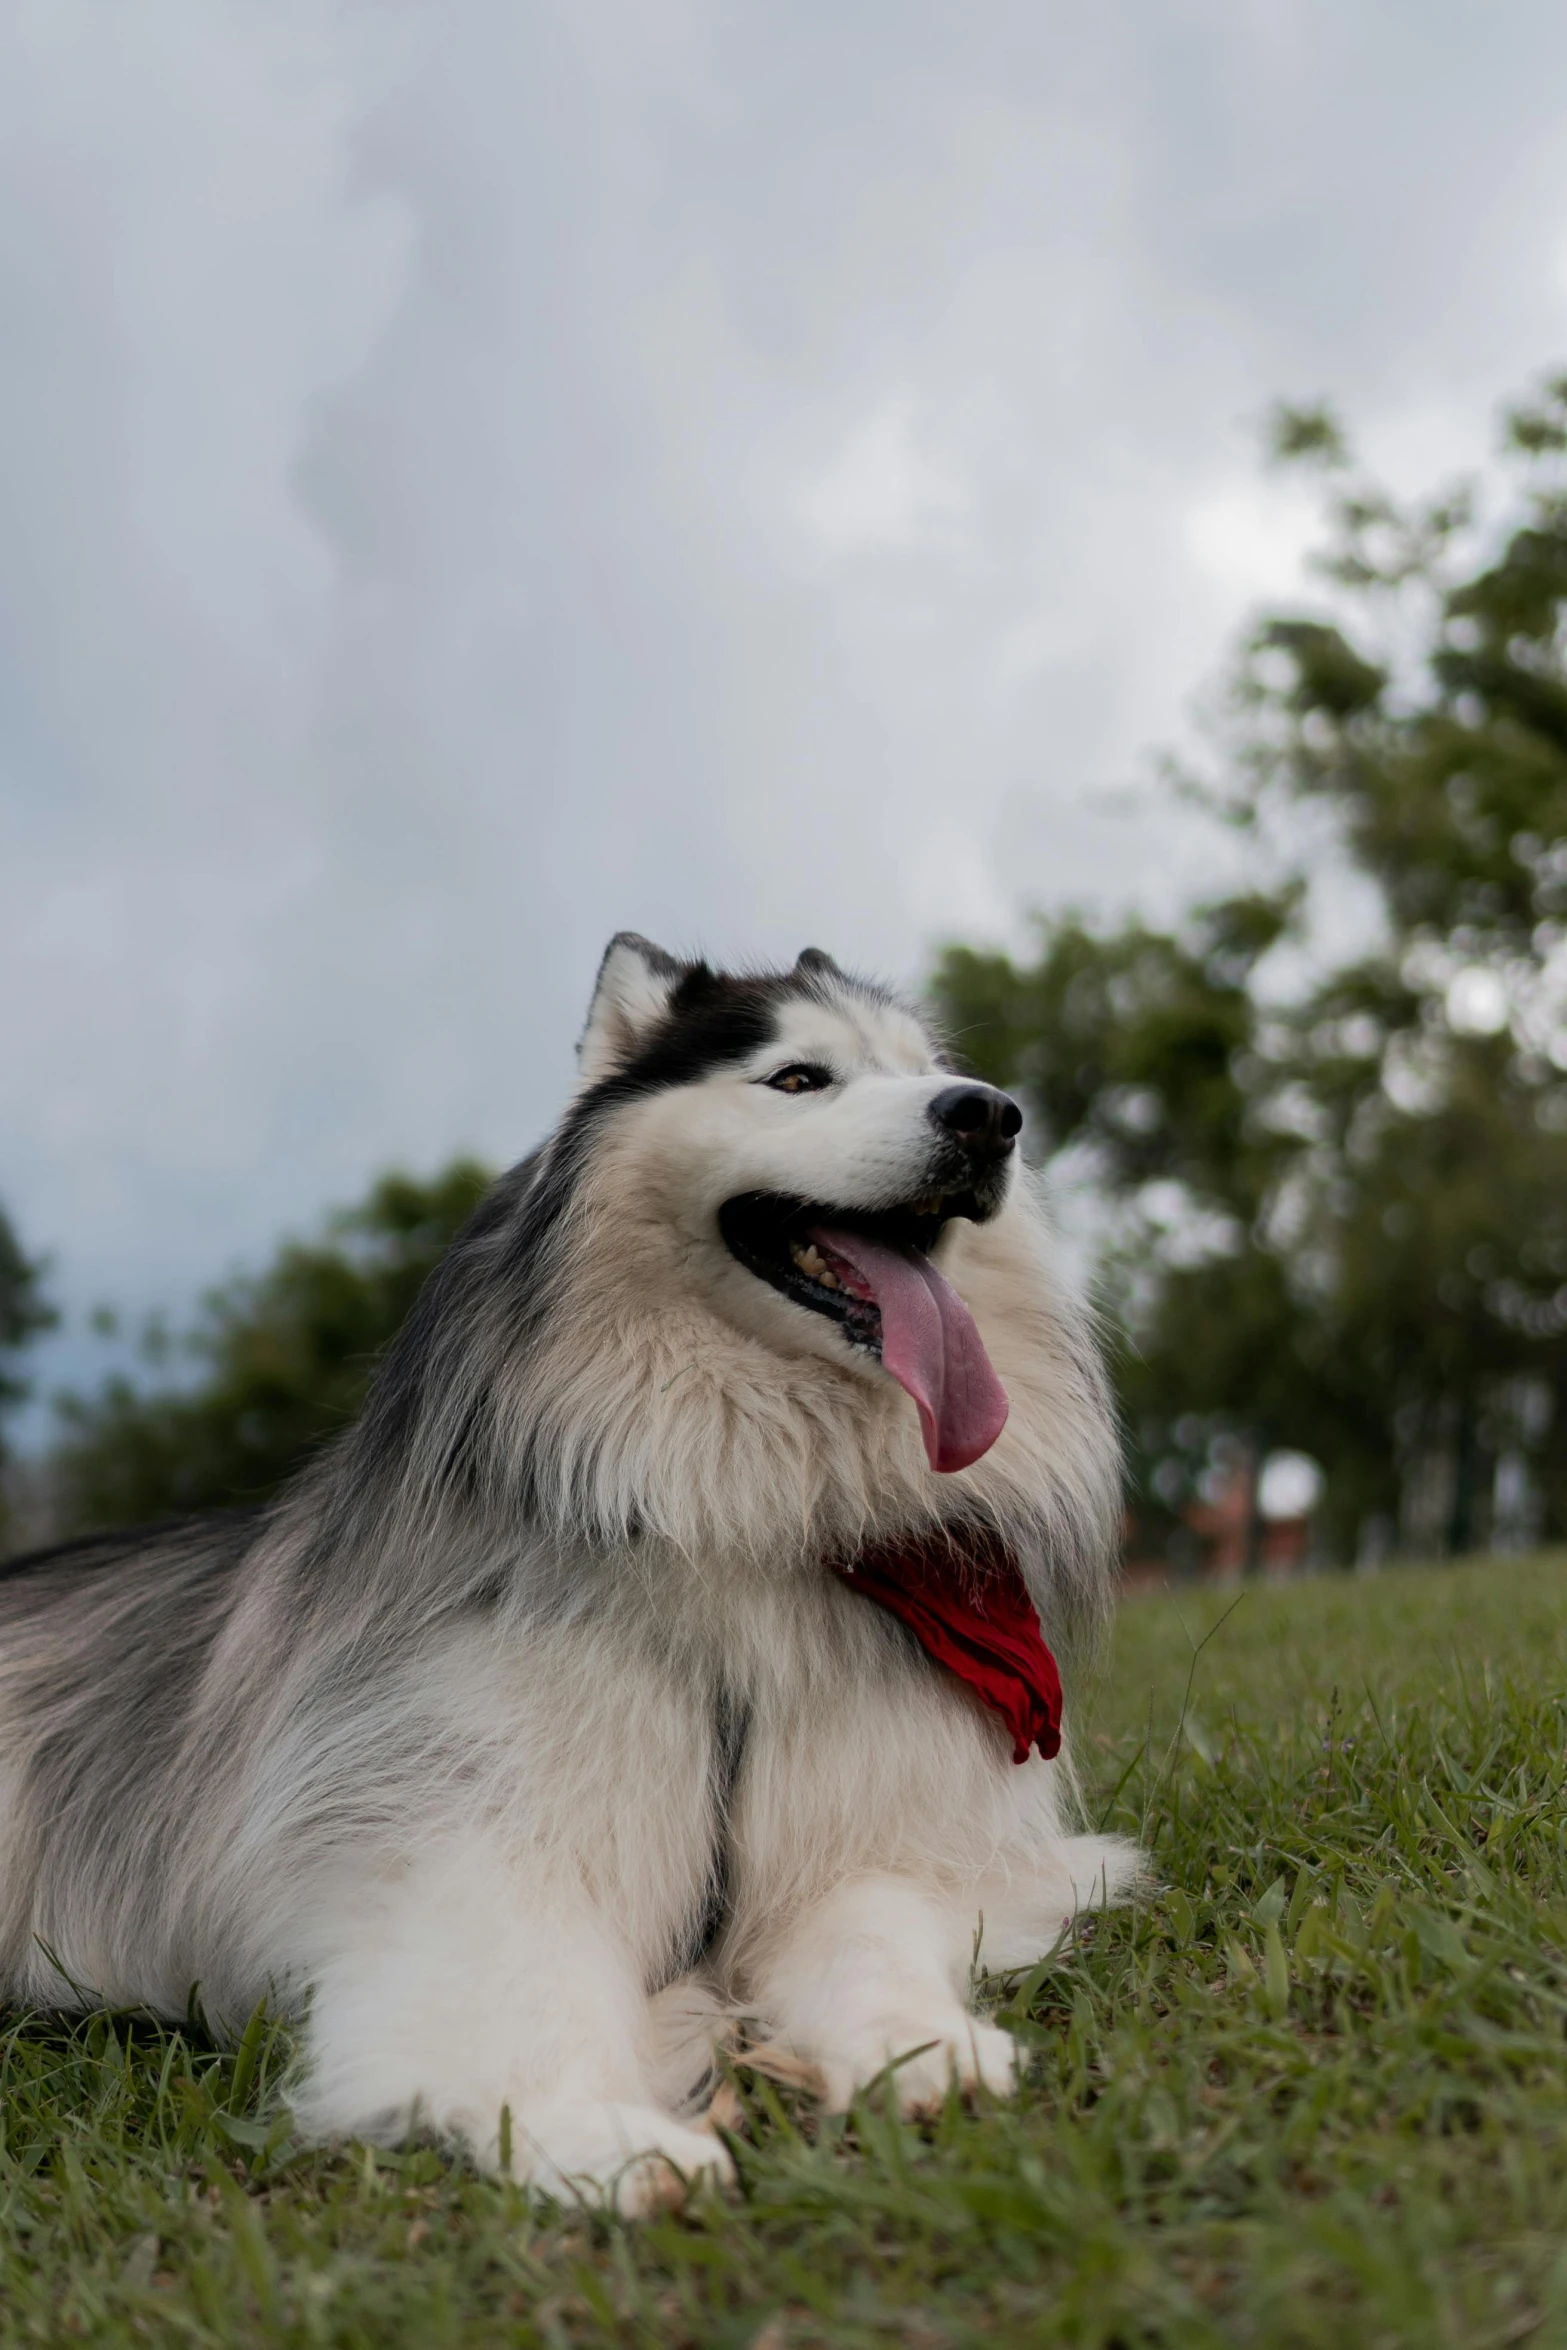 a gray and white dog is sitting in the grass